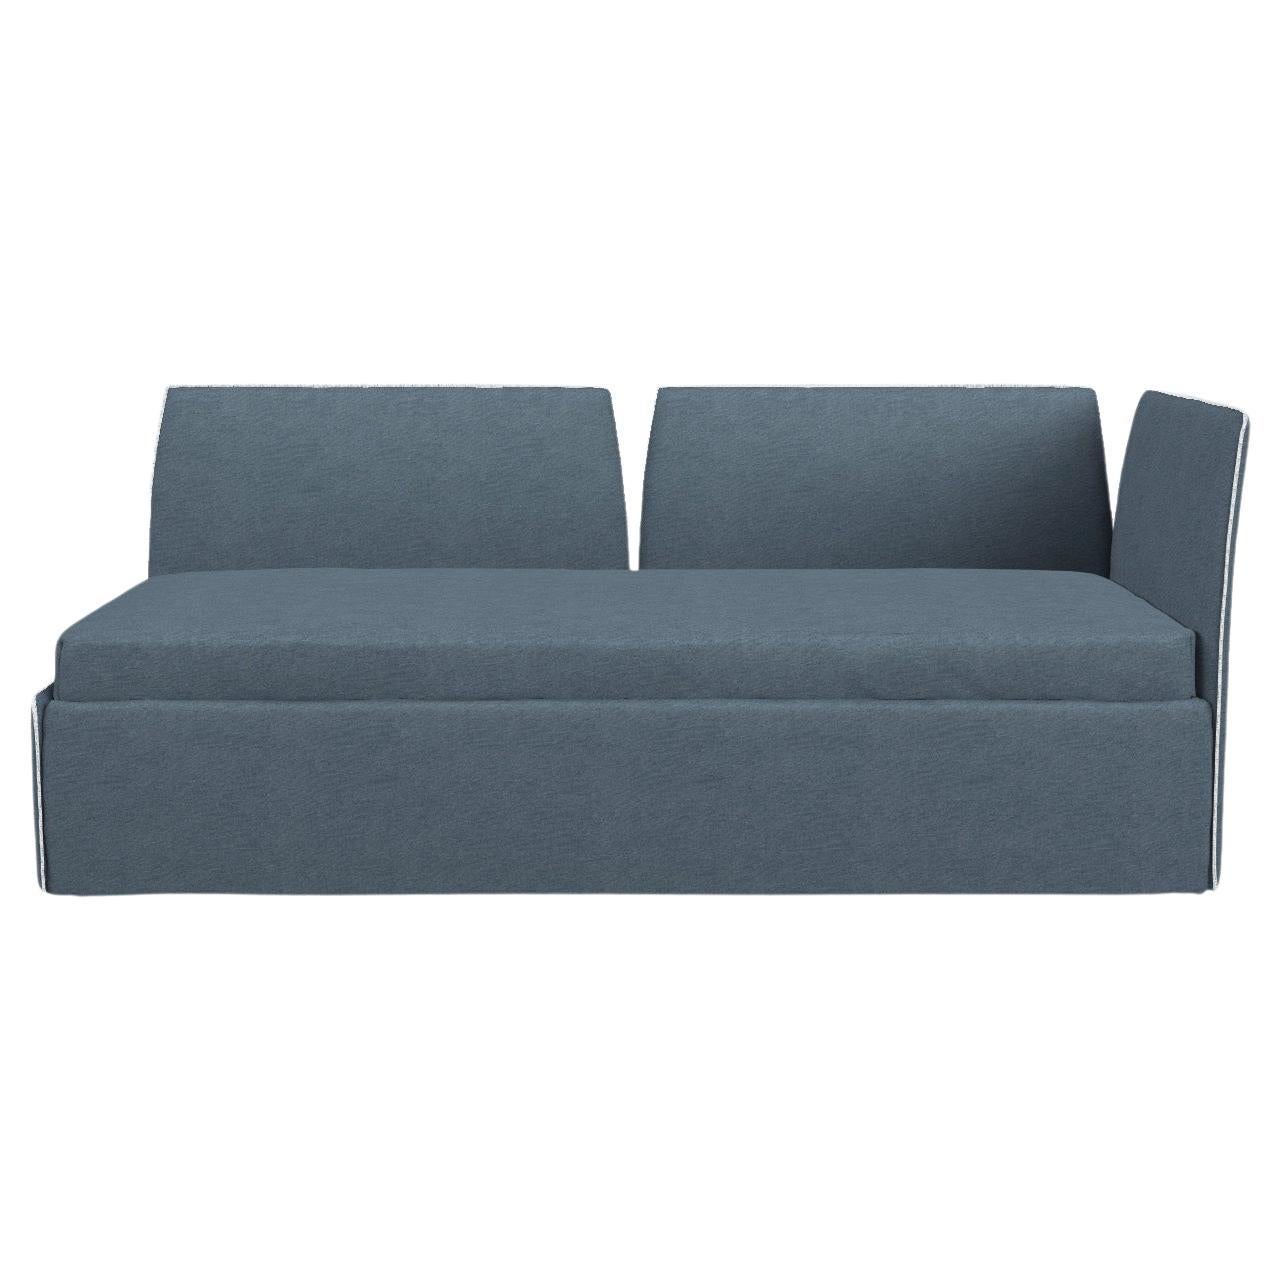 Gervasoni Open 4 Large Modular Bed Sofa in Munch Upholstery by Paola Navone For Sale